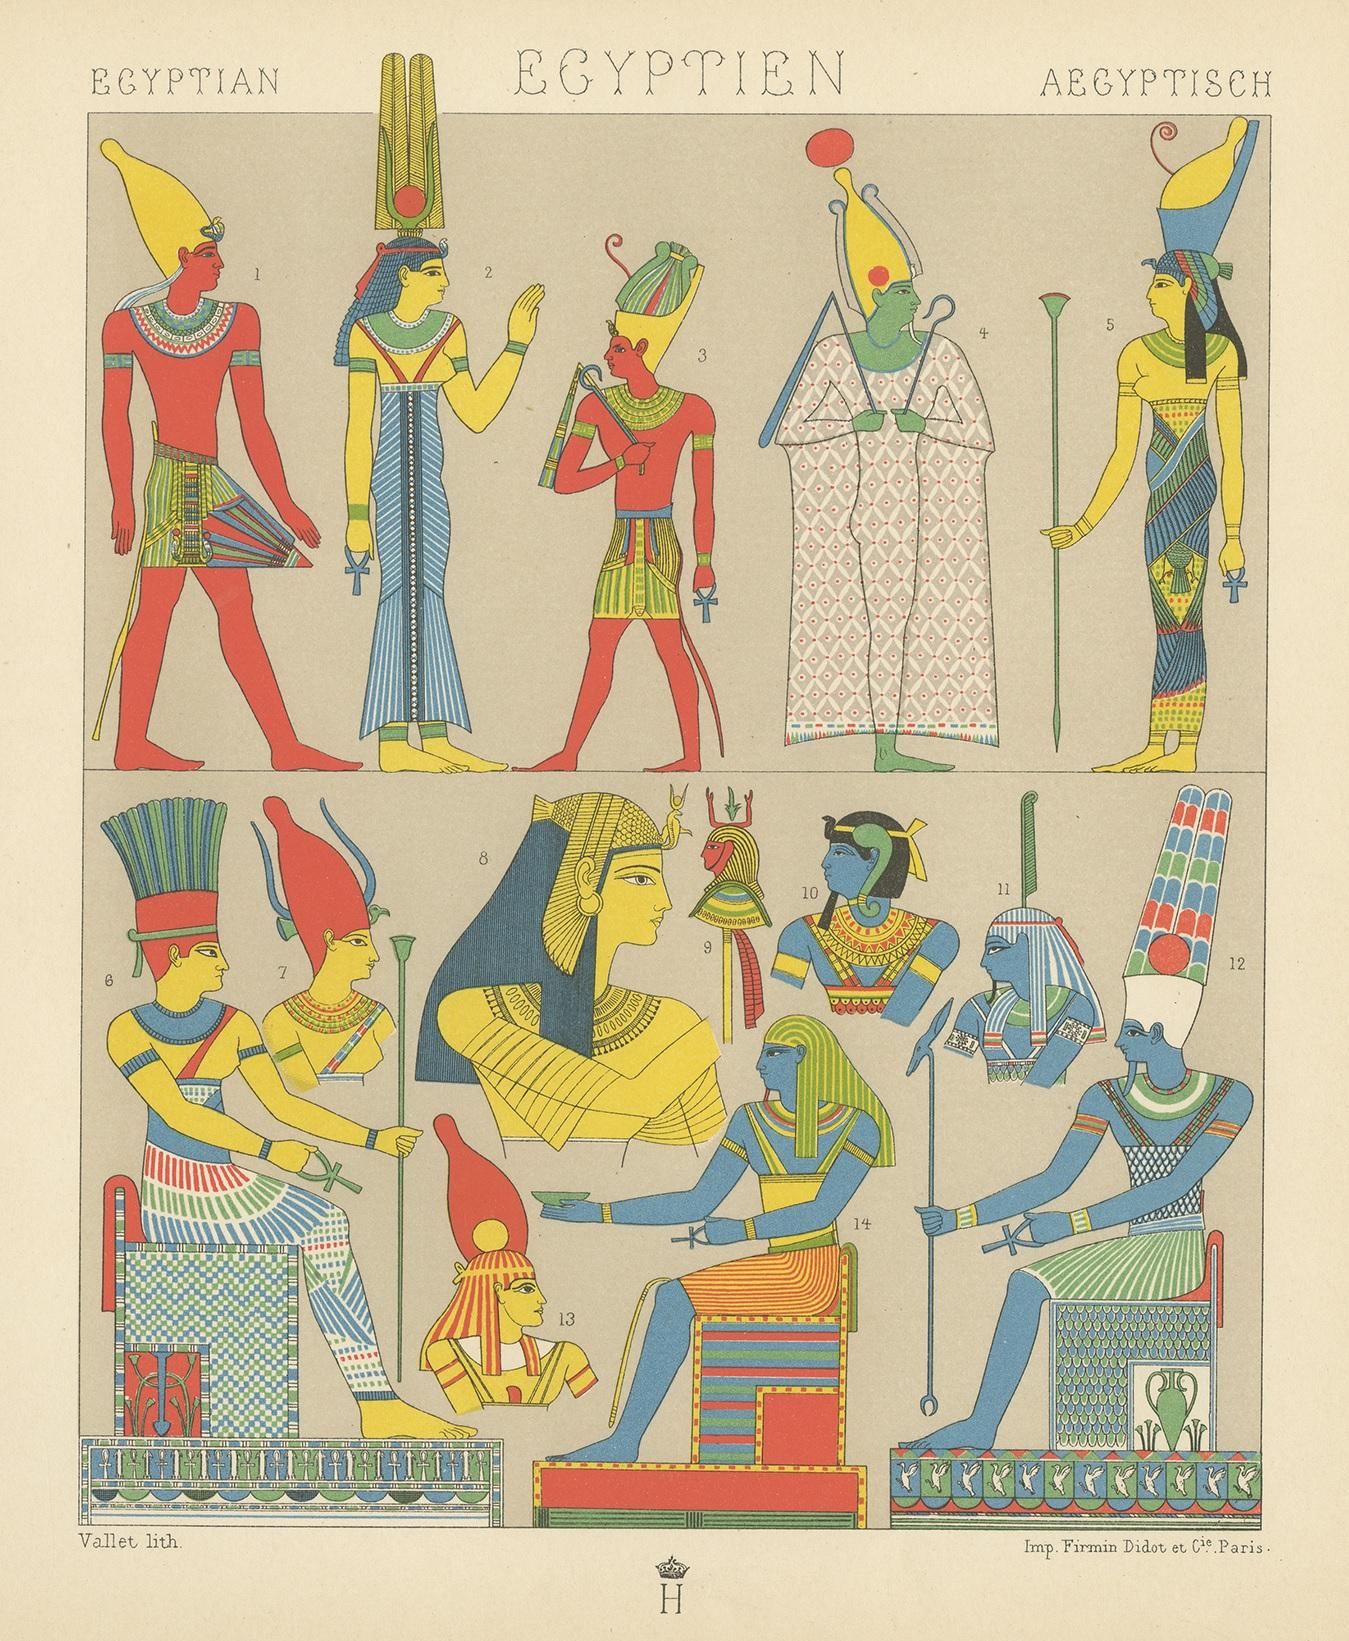 Antique print titled 'Egyptian - Egyptien - Aegyptisch'. Lithograph of ancient costumes of Egypt. This print originates from 'Le Costume Historique (..)' by A. Racinet.